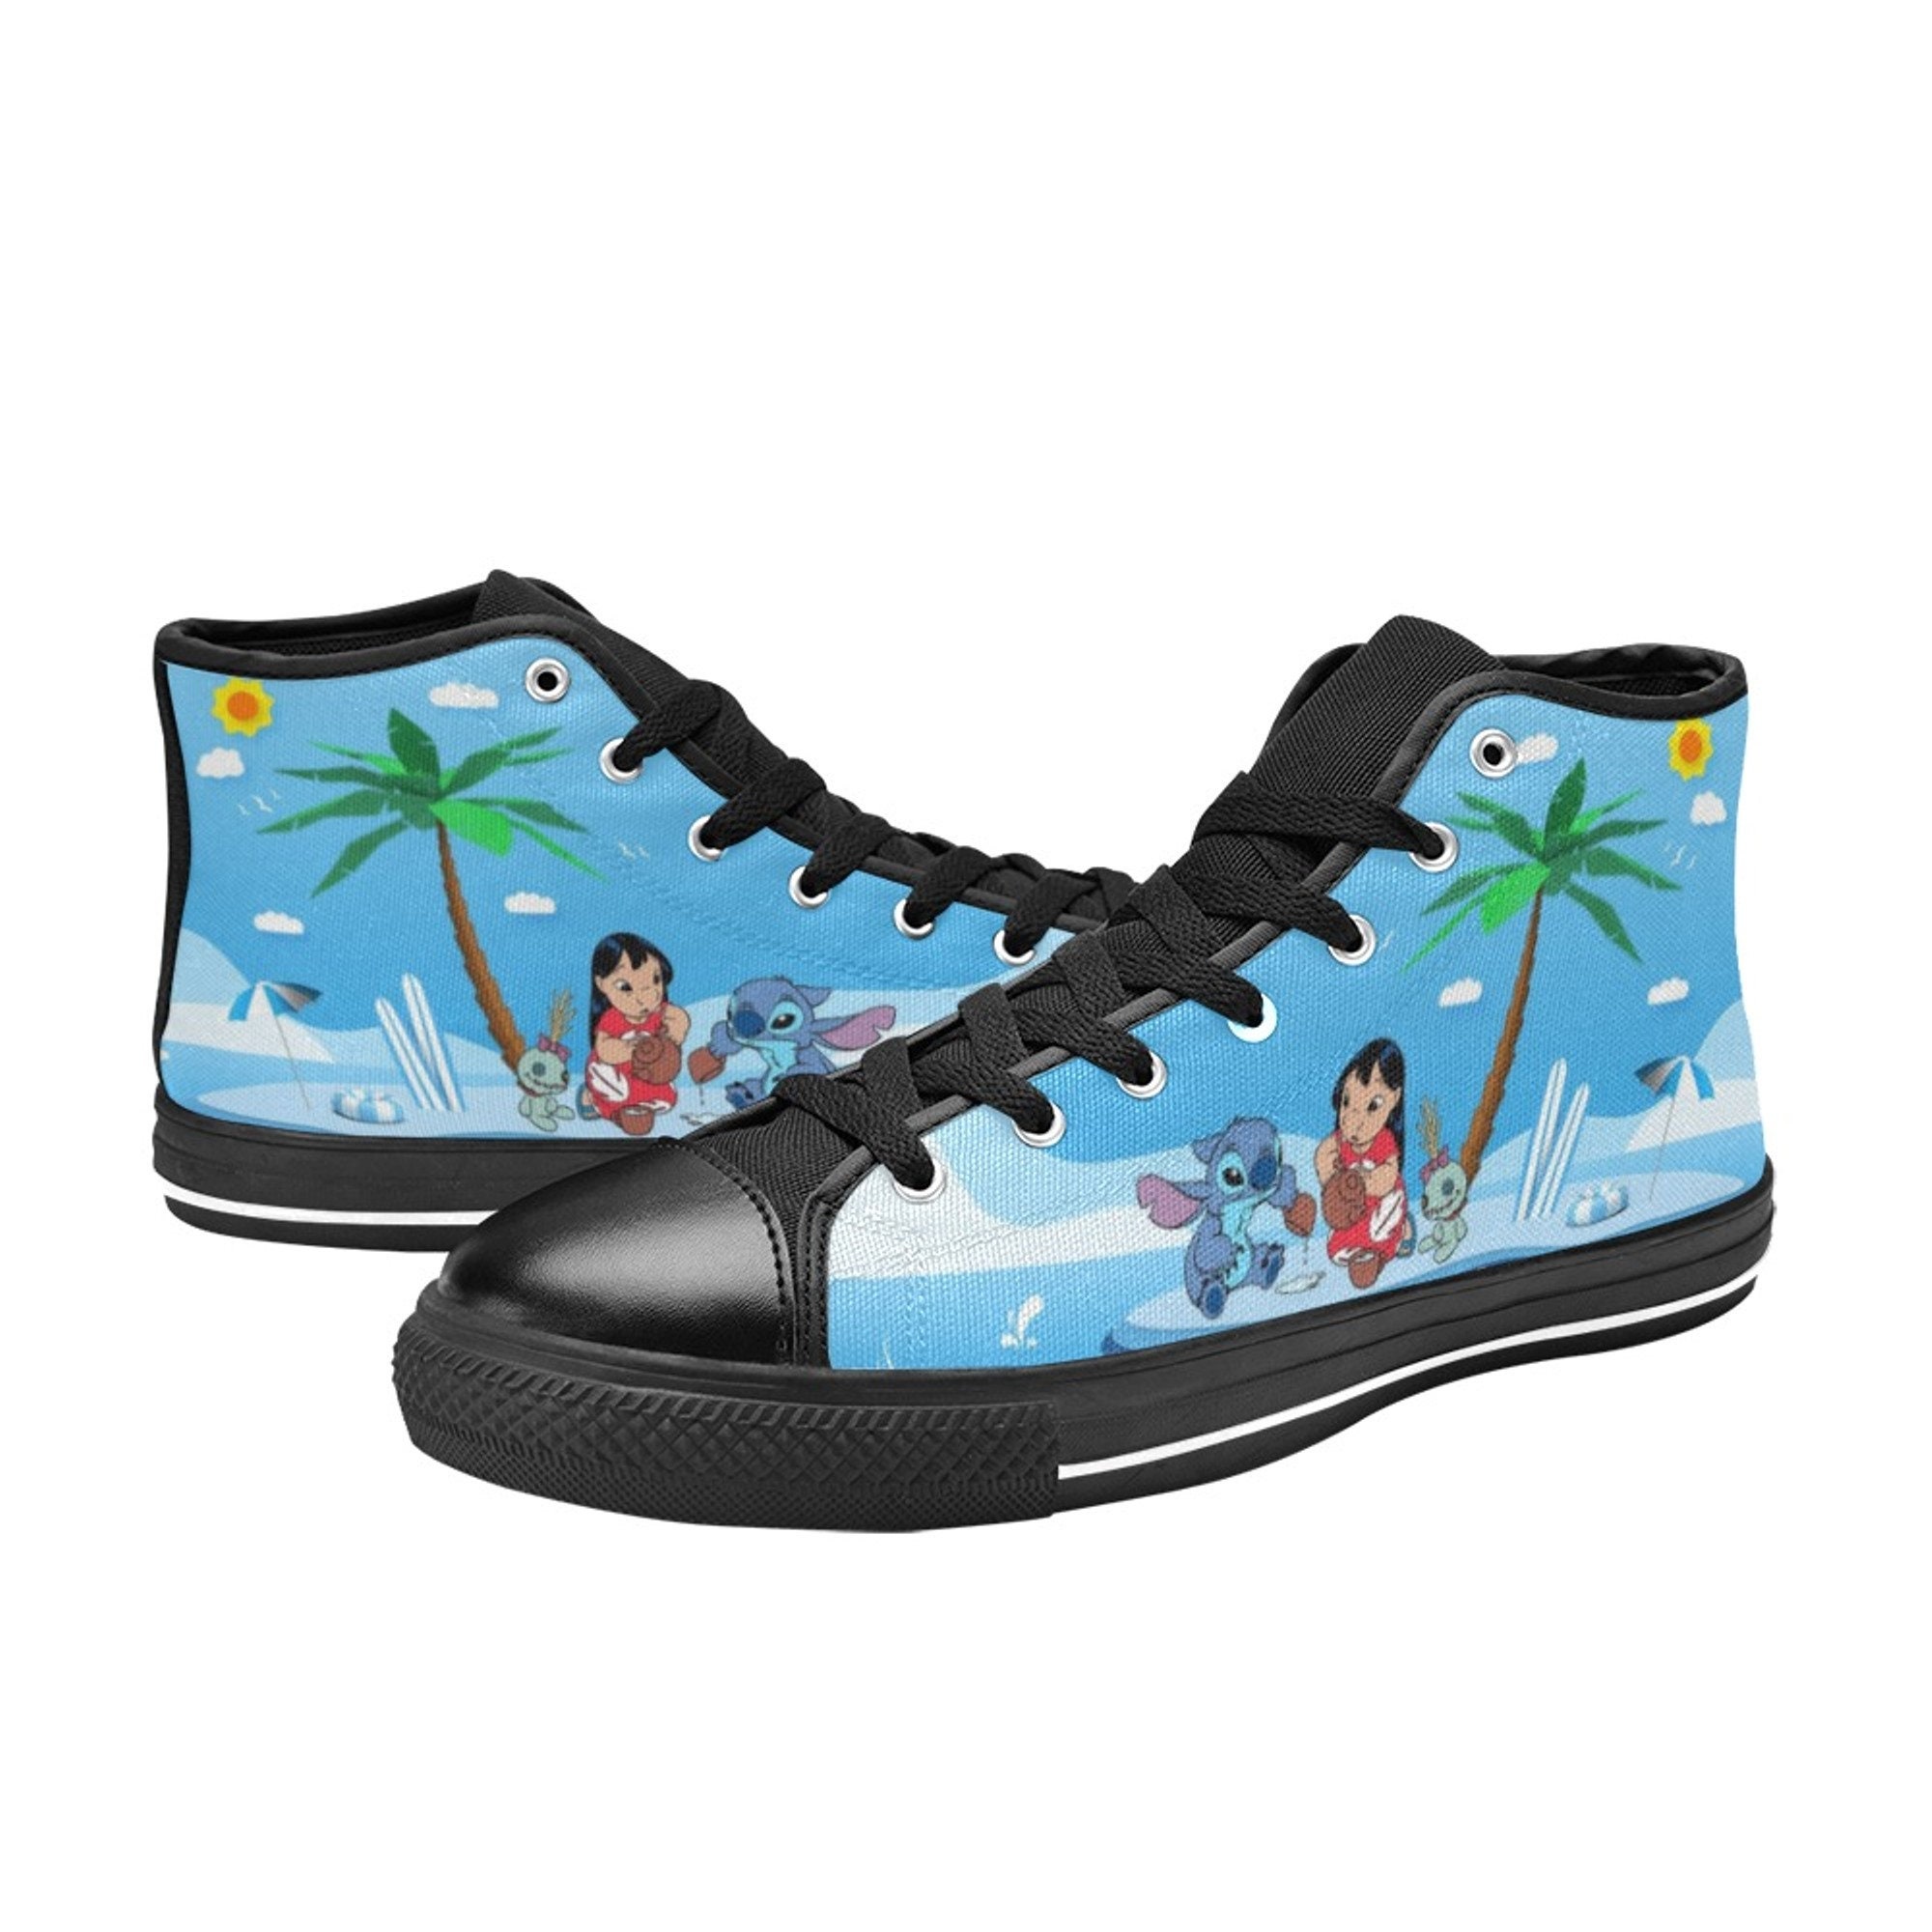 Lilo & Stitch High Top Shoes, Custom Unisex Kids and Adult Shoes